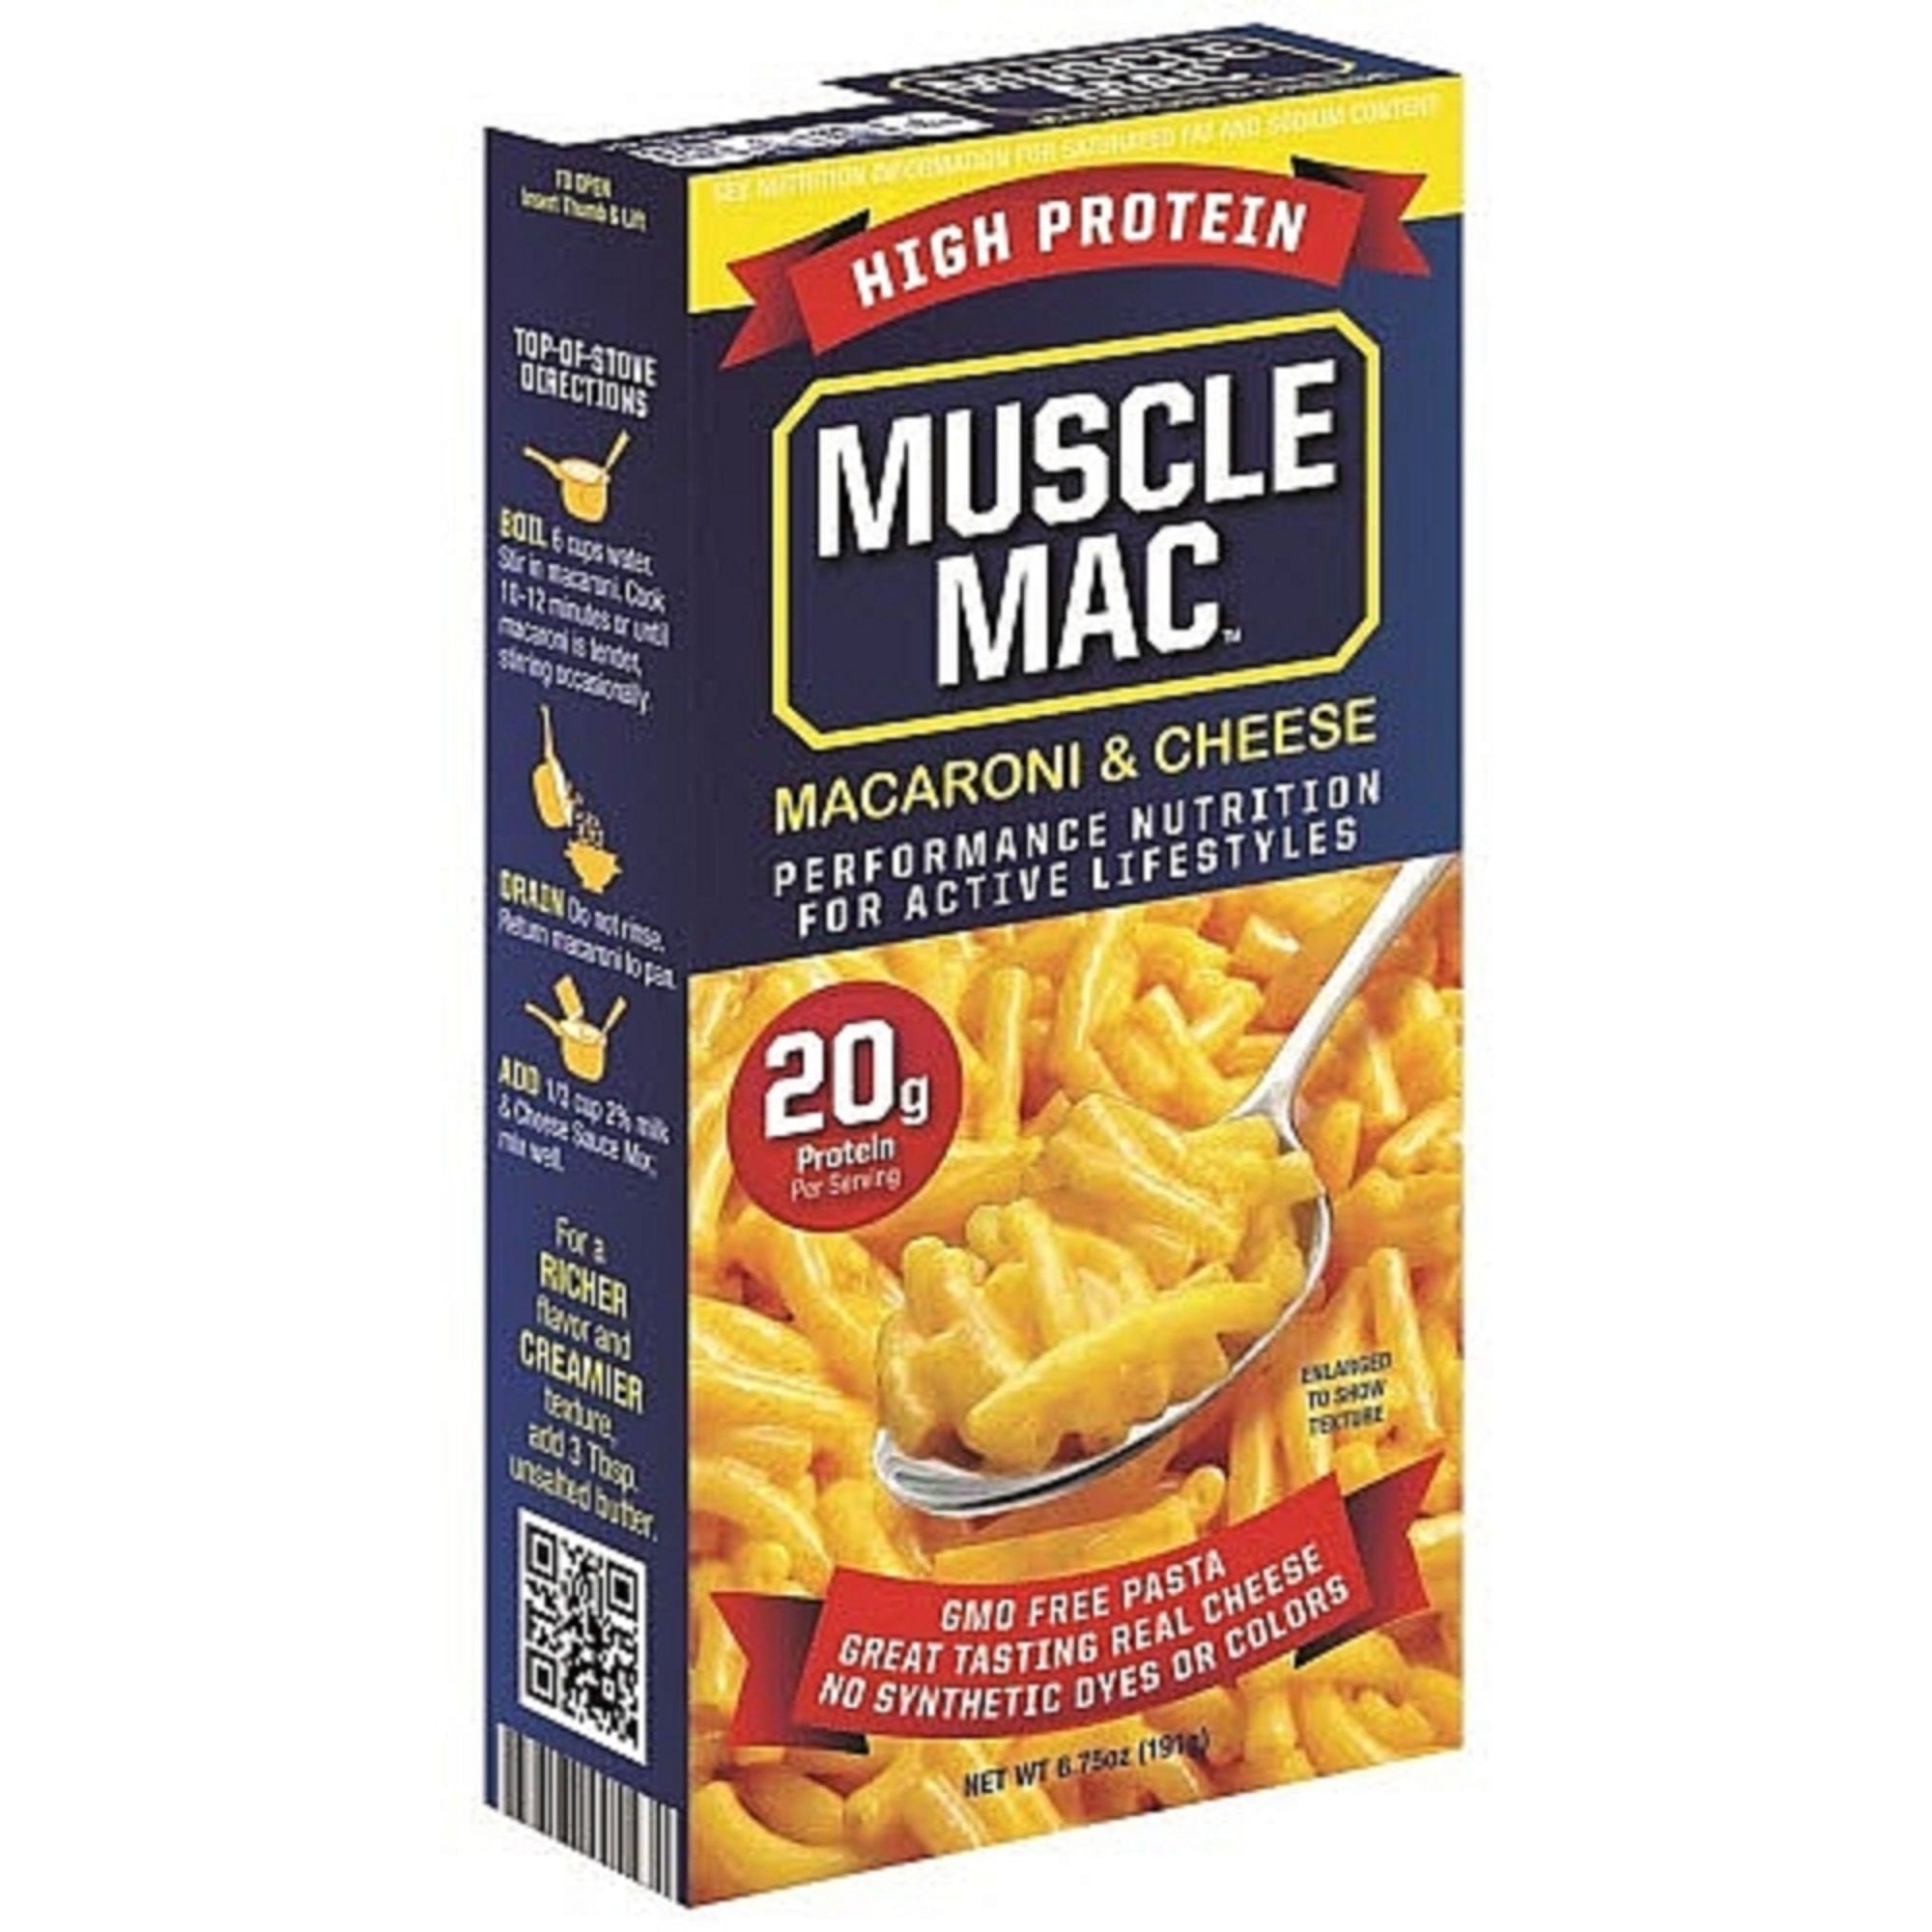 MuscleMac Protein Mac and Cheese Box Food MuscleMac